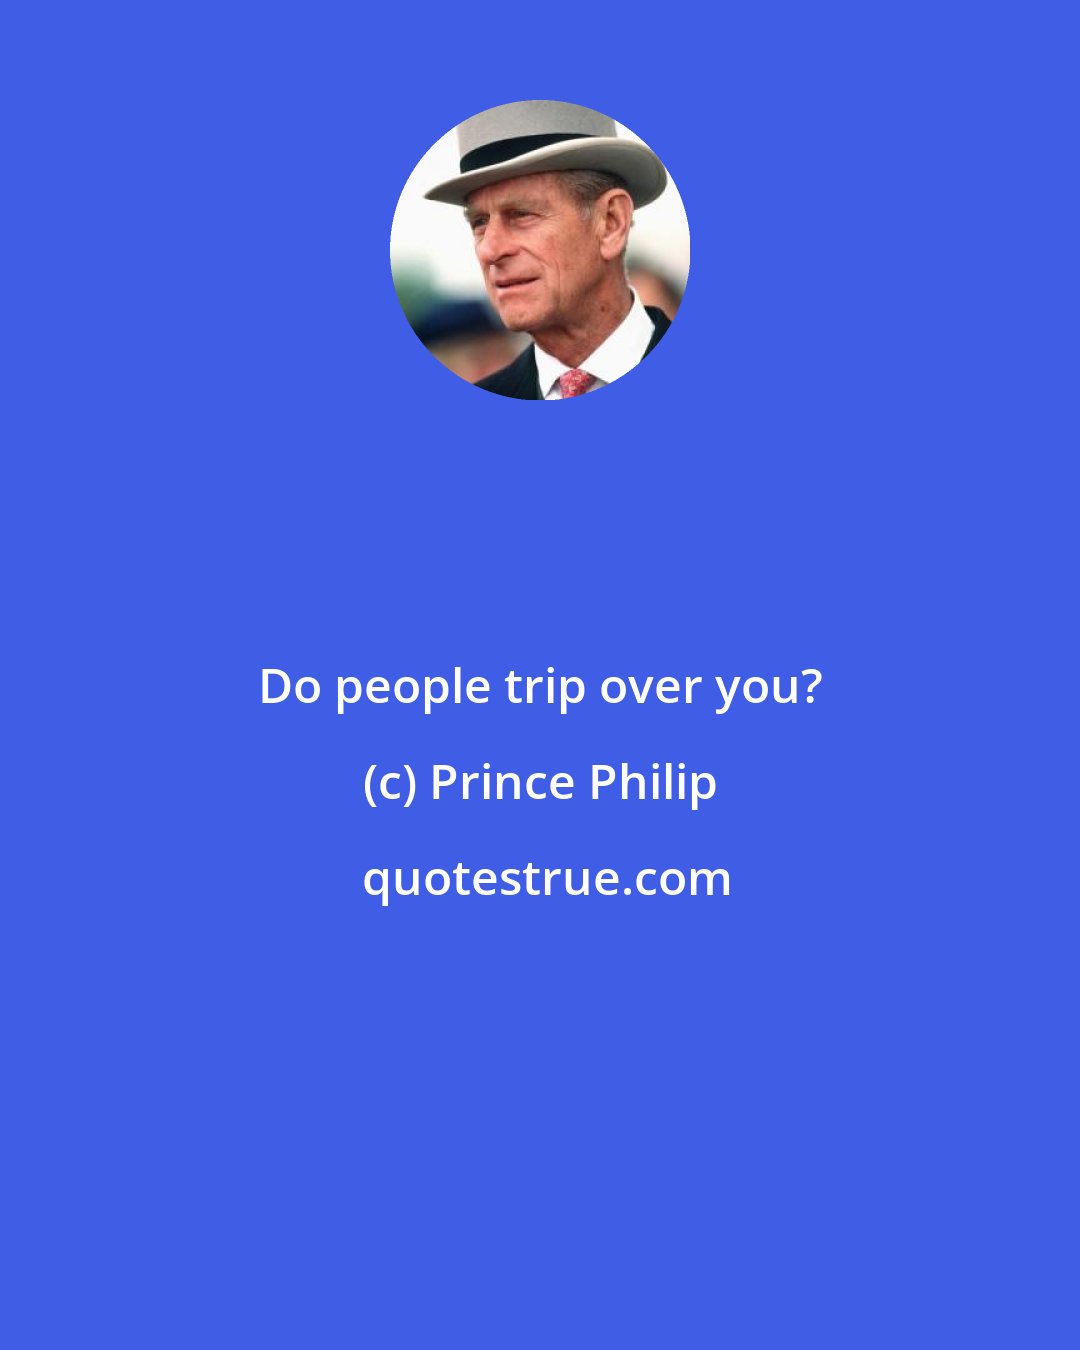 Prince Philip: Do people trip over you?